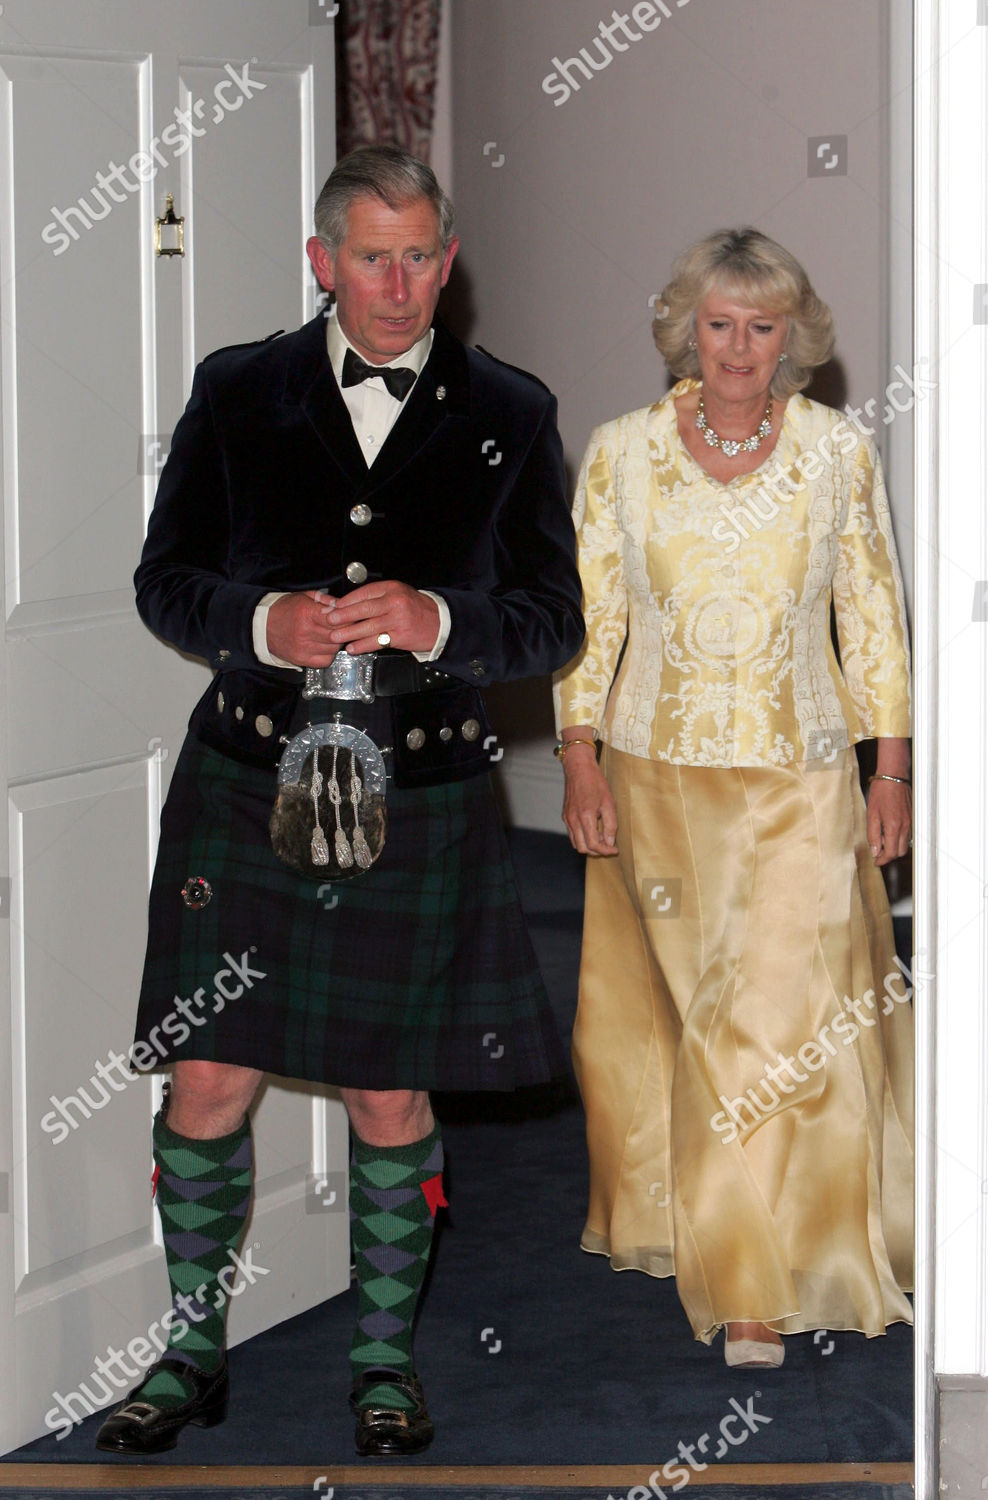 prince-charles-and-camilla-parker-bowles-duchess-of-cornwall-at-a-reception-to-celebrate-the-princes-trusts-30th-anniversary-holyrood-palace-edinburgh-scotland-britain-shutterstock-editorial-590898d.jpg